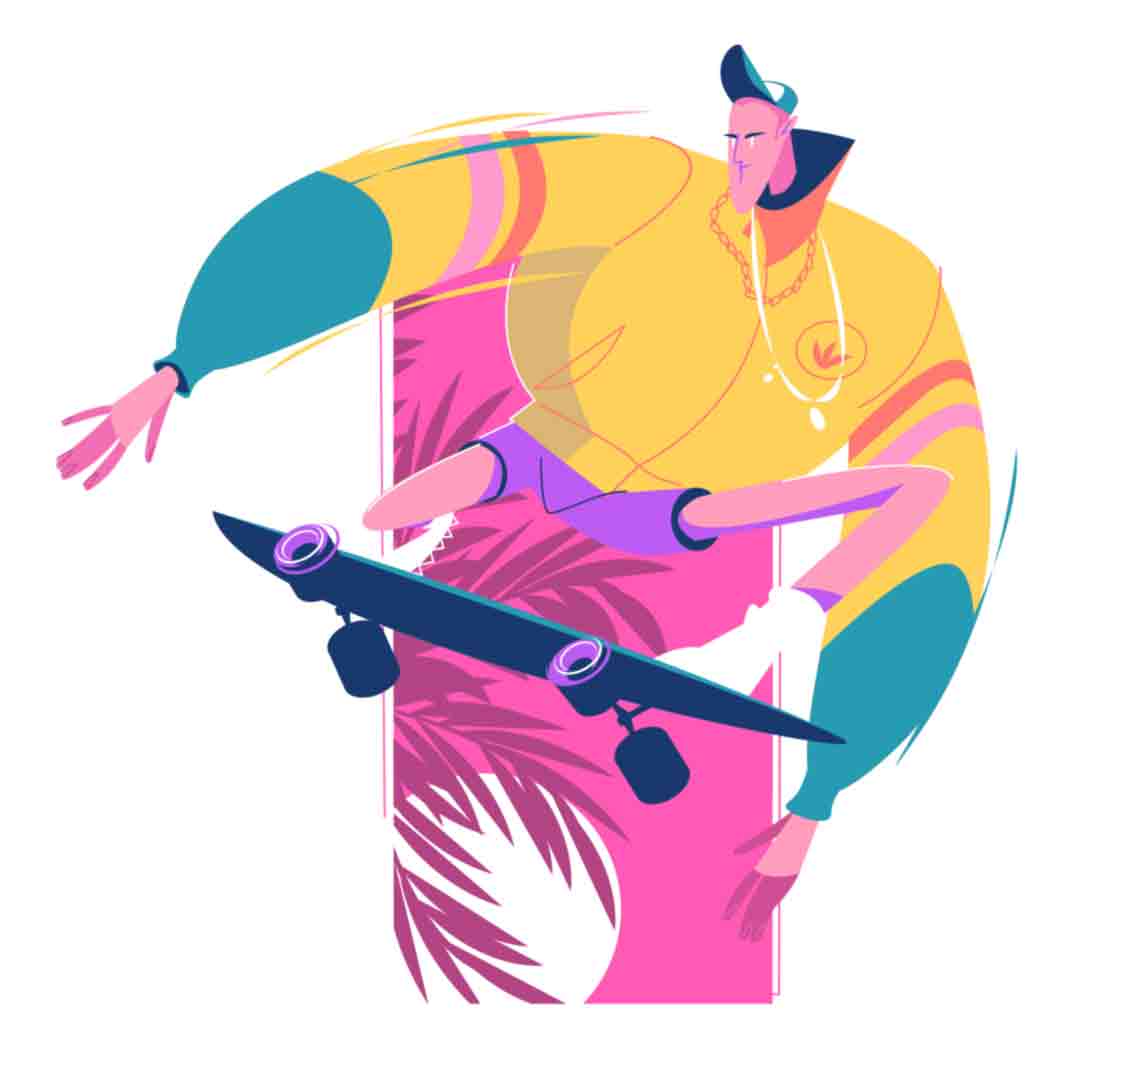 Bright character illustrations on a summer theme with lots of sun and summer heat. Summer activities, vacation and relaxation.